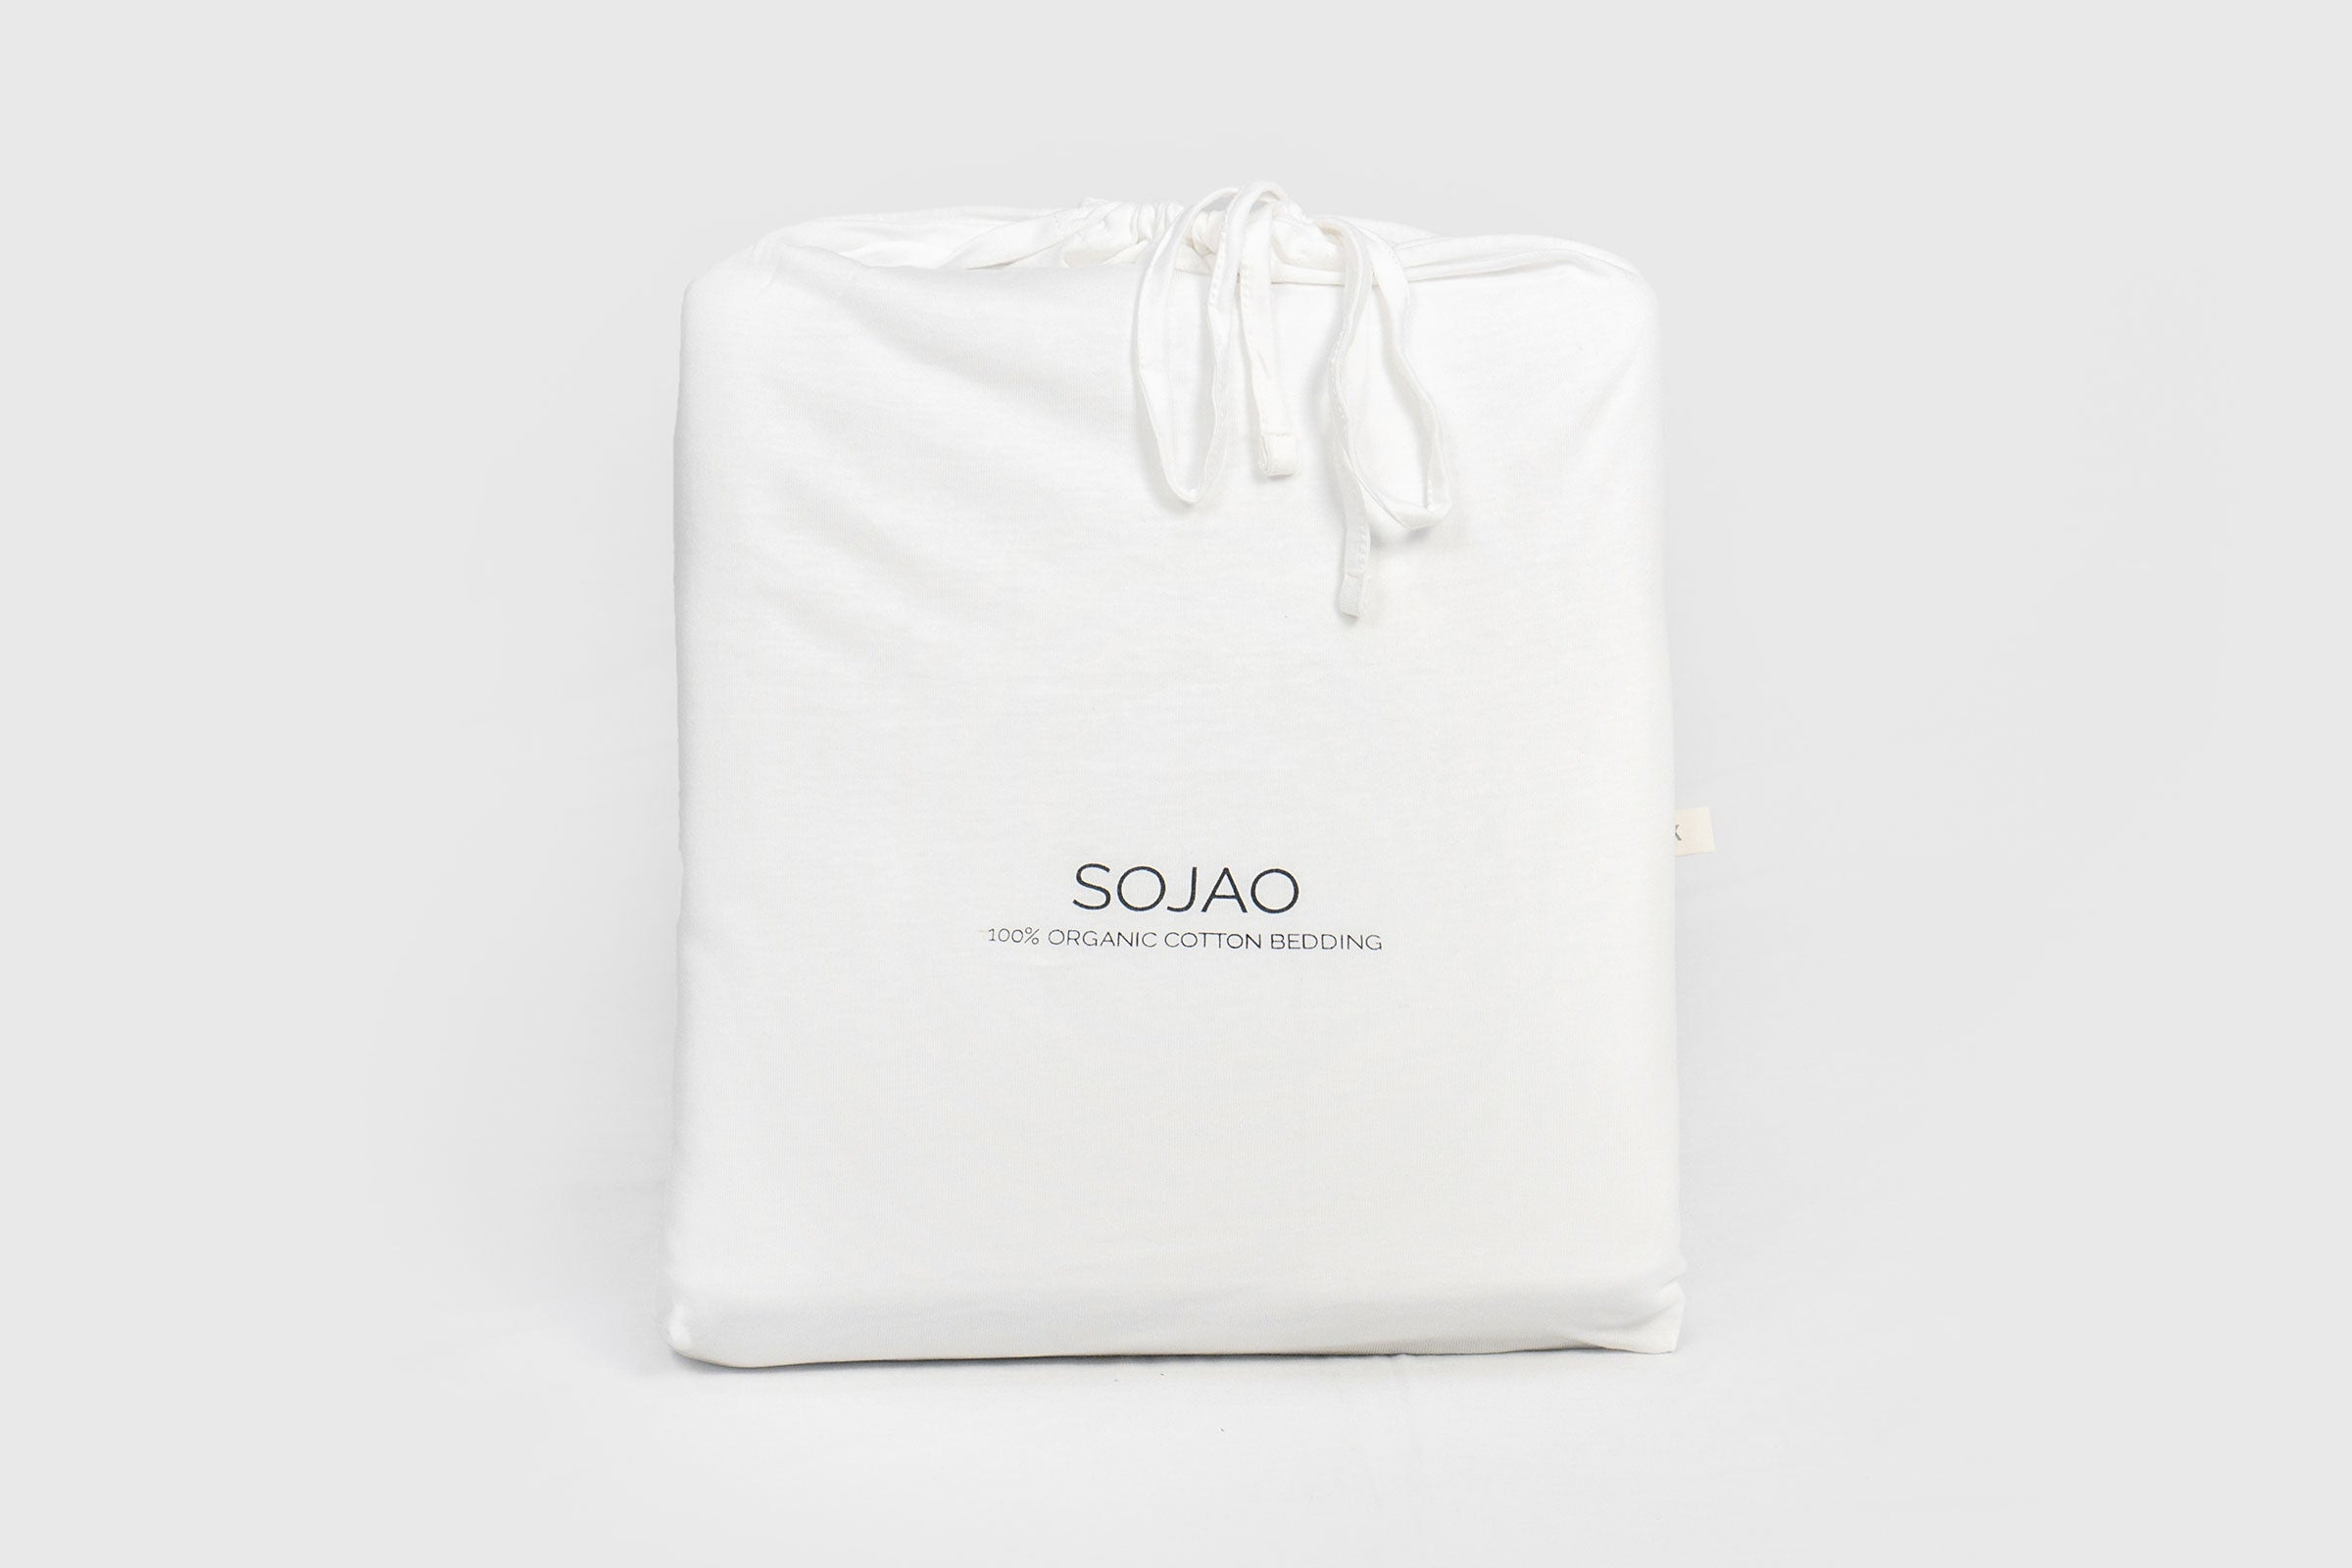 jersey-white-body-pillow-case-dust-bag-by-sojao.jpg